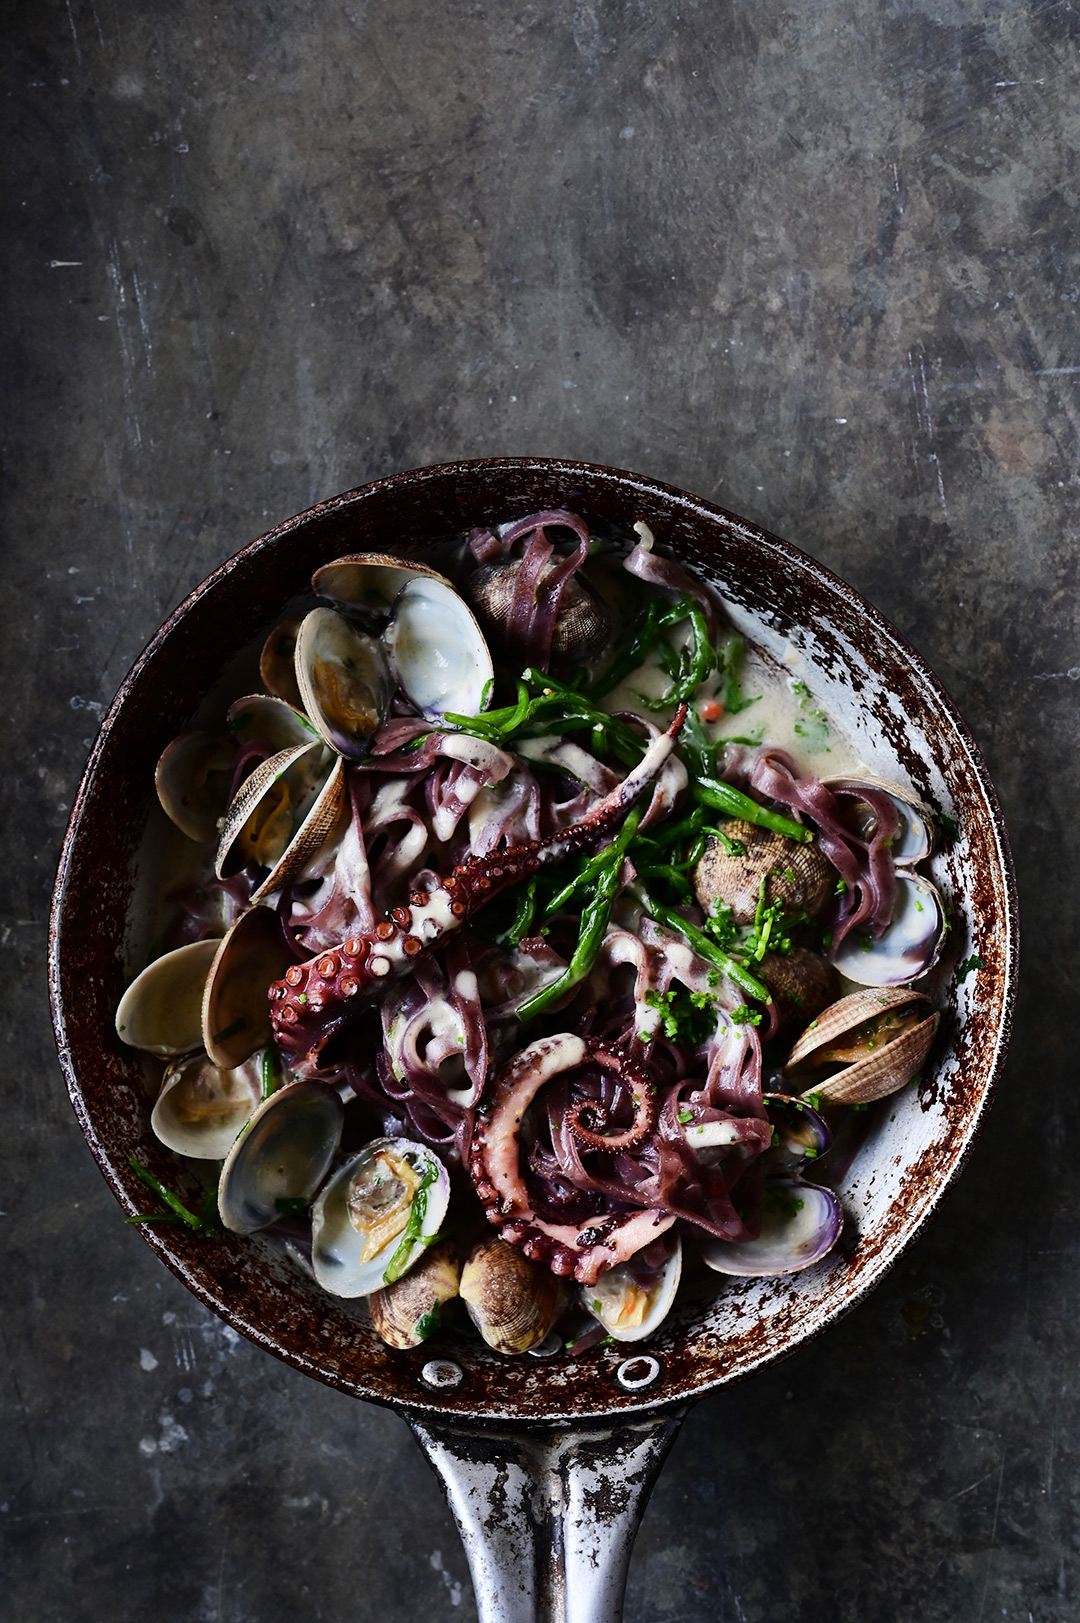 serving dumplings | Creamy garlic black pasta with clams and octopus